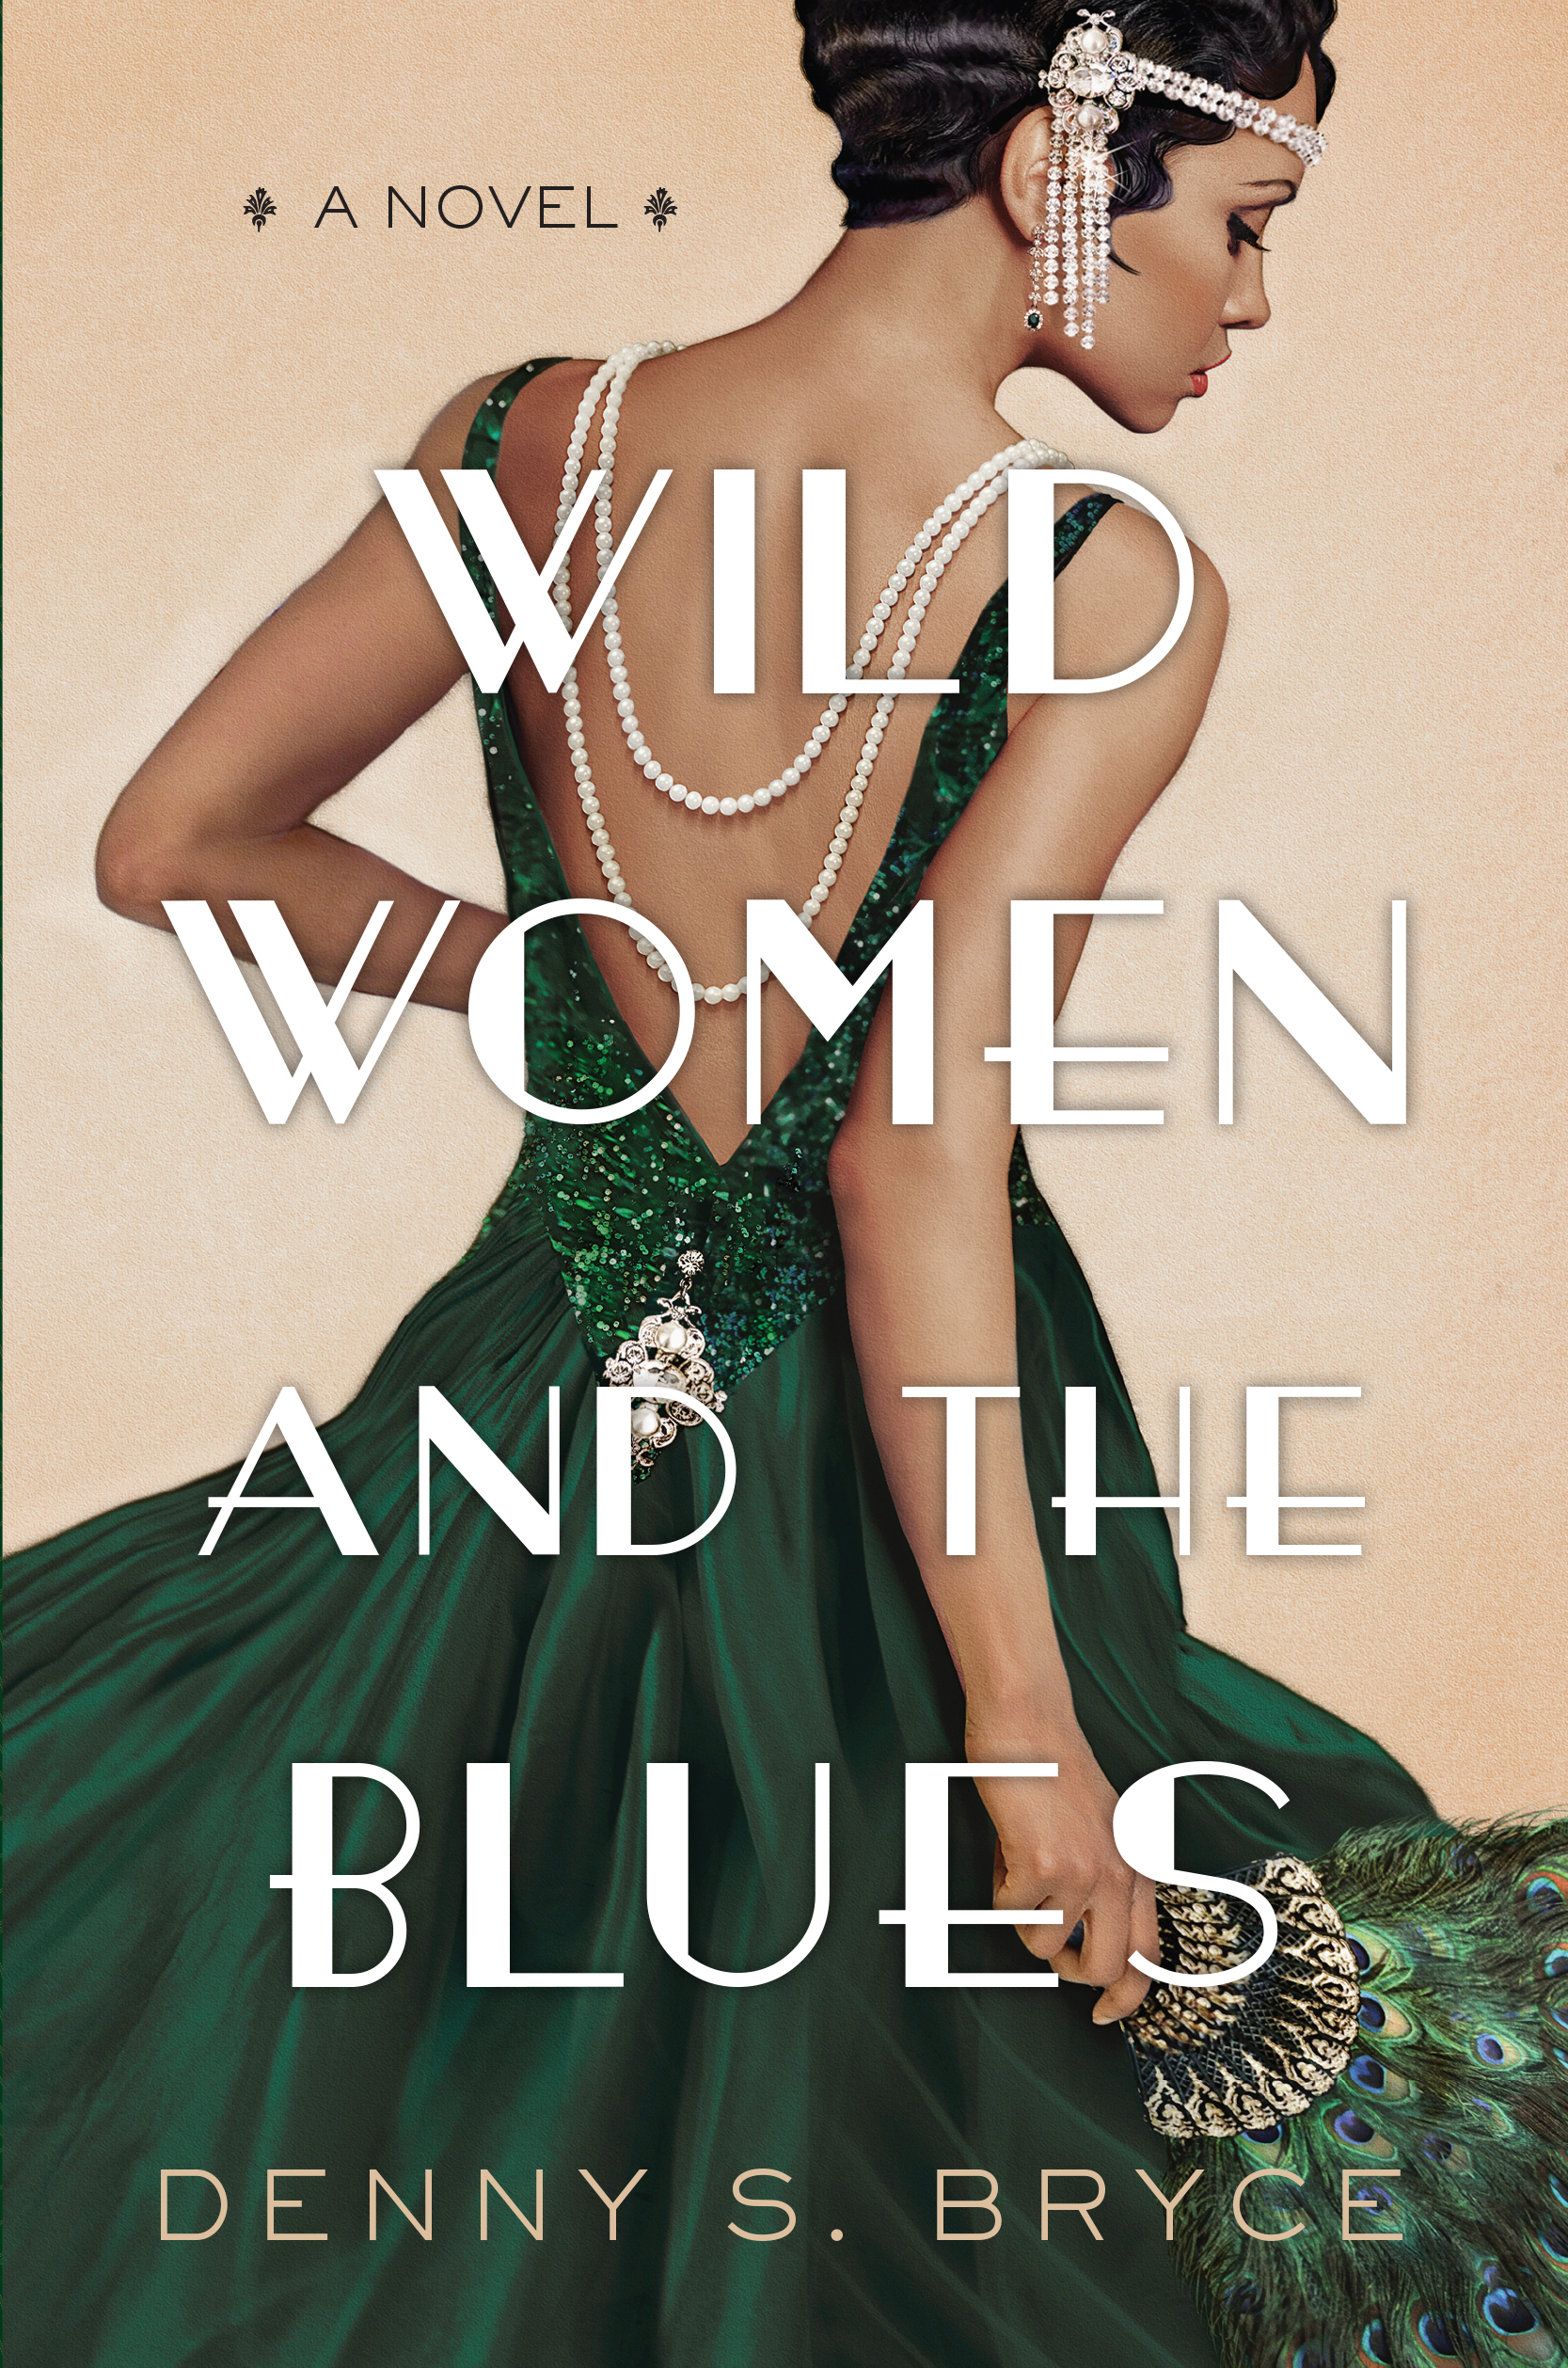 Wild Women And The Blues: The Cover Designers!